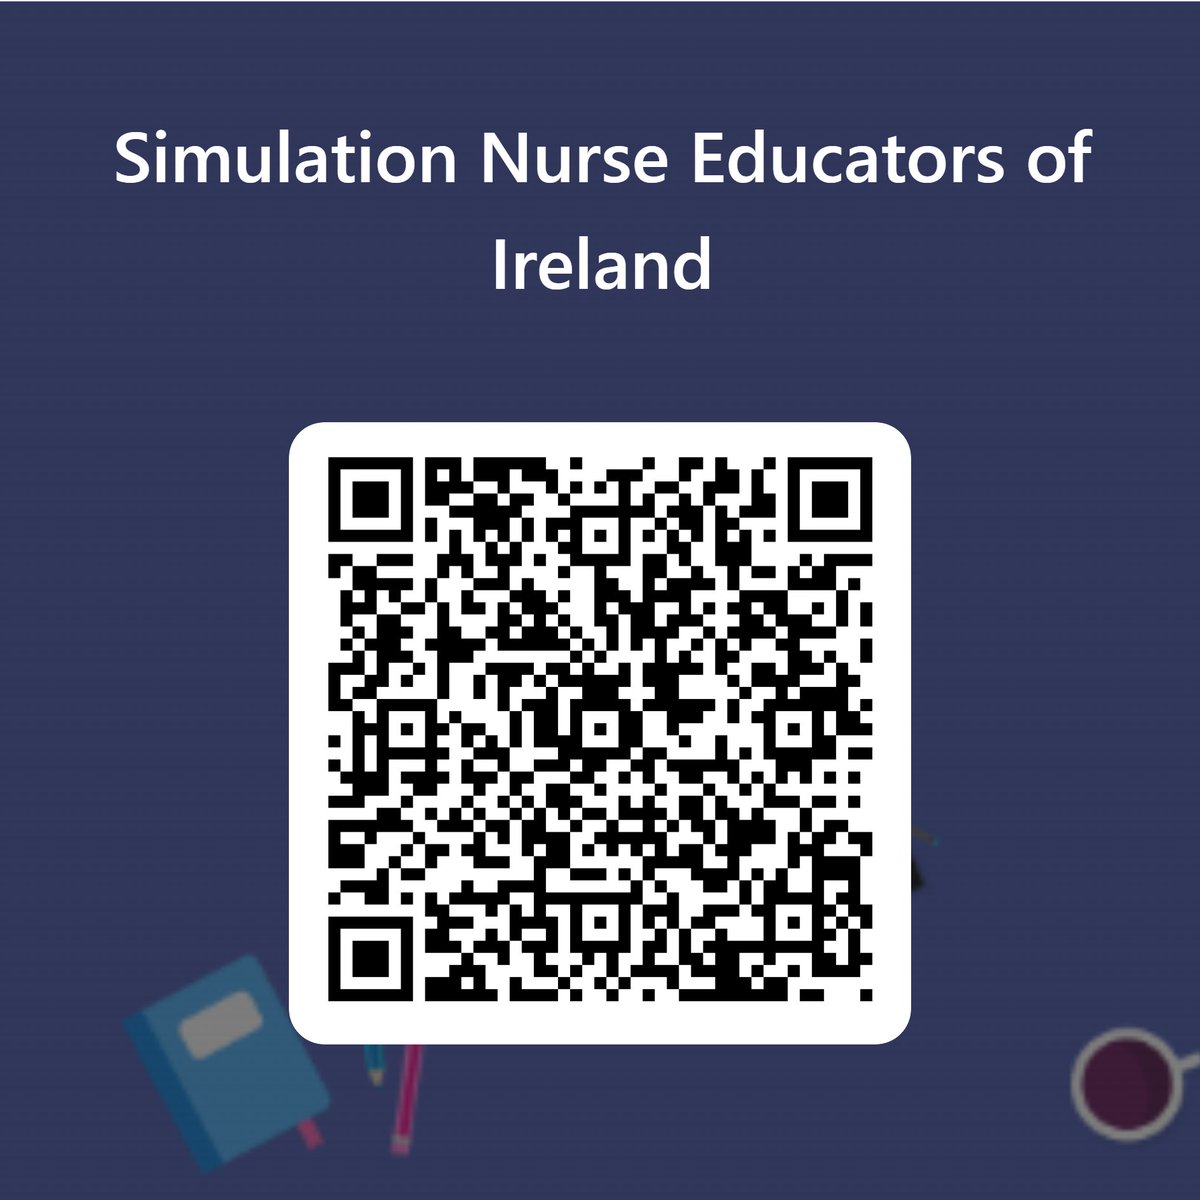 Introducing Simulation Nurse Educator's of Ireland (SNEI) forum. Please register by the qr code, or by link: forms.office.com/r/JiFupwdd8d 
#Empoweringchange, exciting times ahead for SNE's. @PHILIPPARACKAL @GalwayICAPSS @HSE_NSO @NMBI_ie @saoltagroup @HSELive @DrDaraByrne @SNEIreland